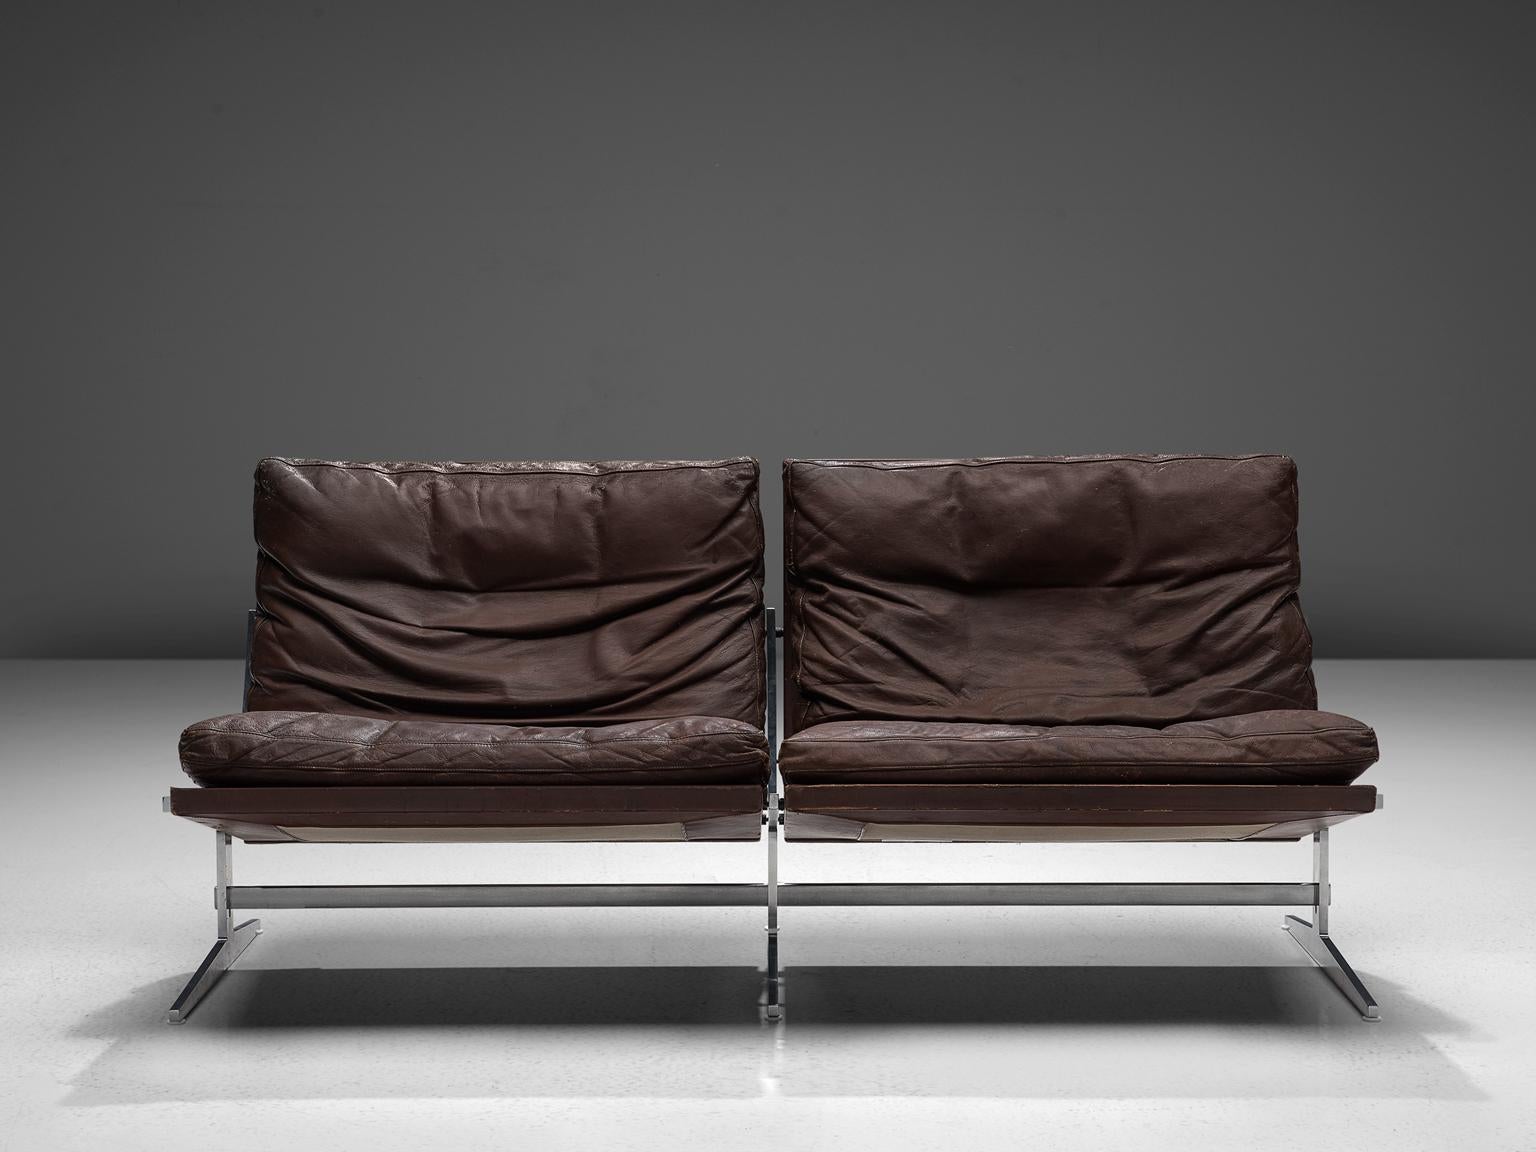 Preben Fabricius & Jørgen Kastholm, sofa model BO561, brushed steel and brown leather, Denmark, 1962. 

This modern slipper sofa is executed in steel and leather, holding an L-shaped seating. This shape is repeated in the legs. Besides this slick